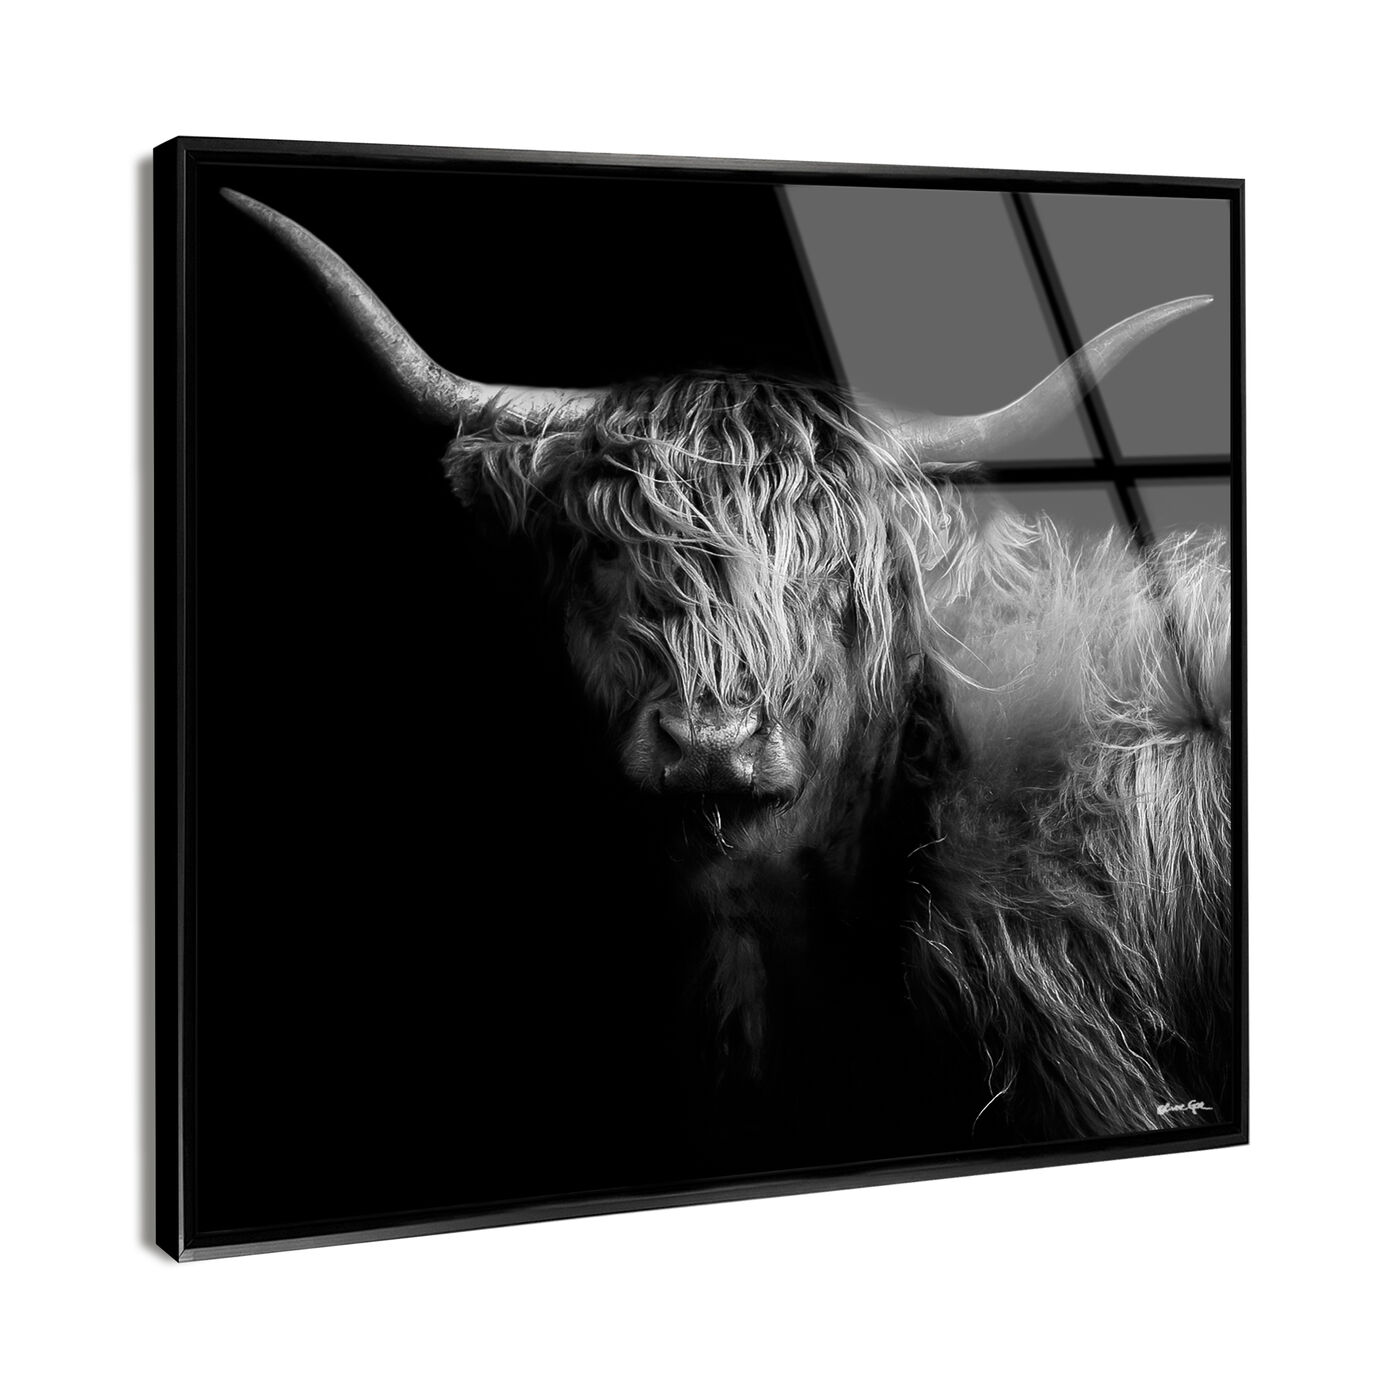 A Cow Square - Framed Acrylic Art